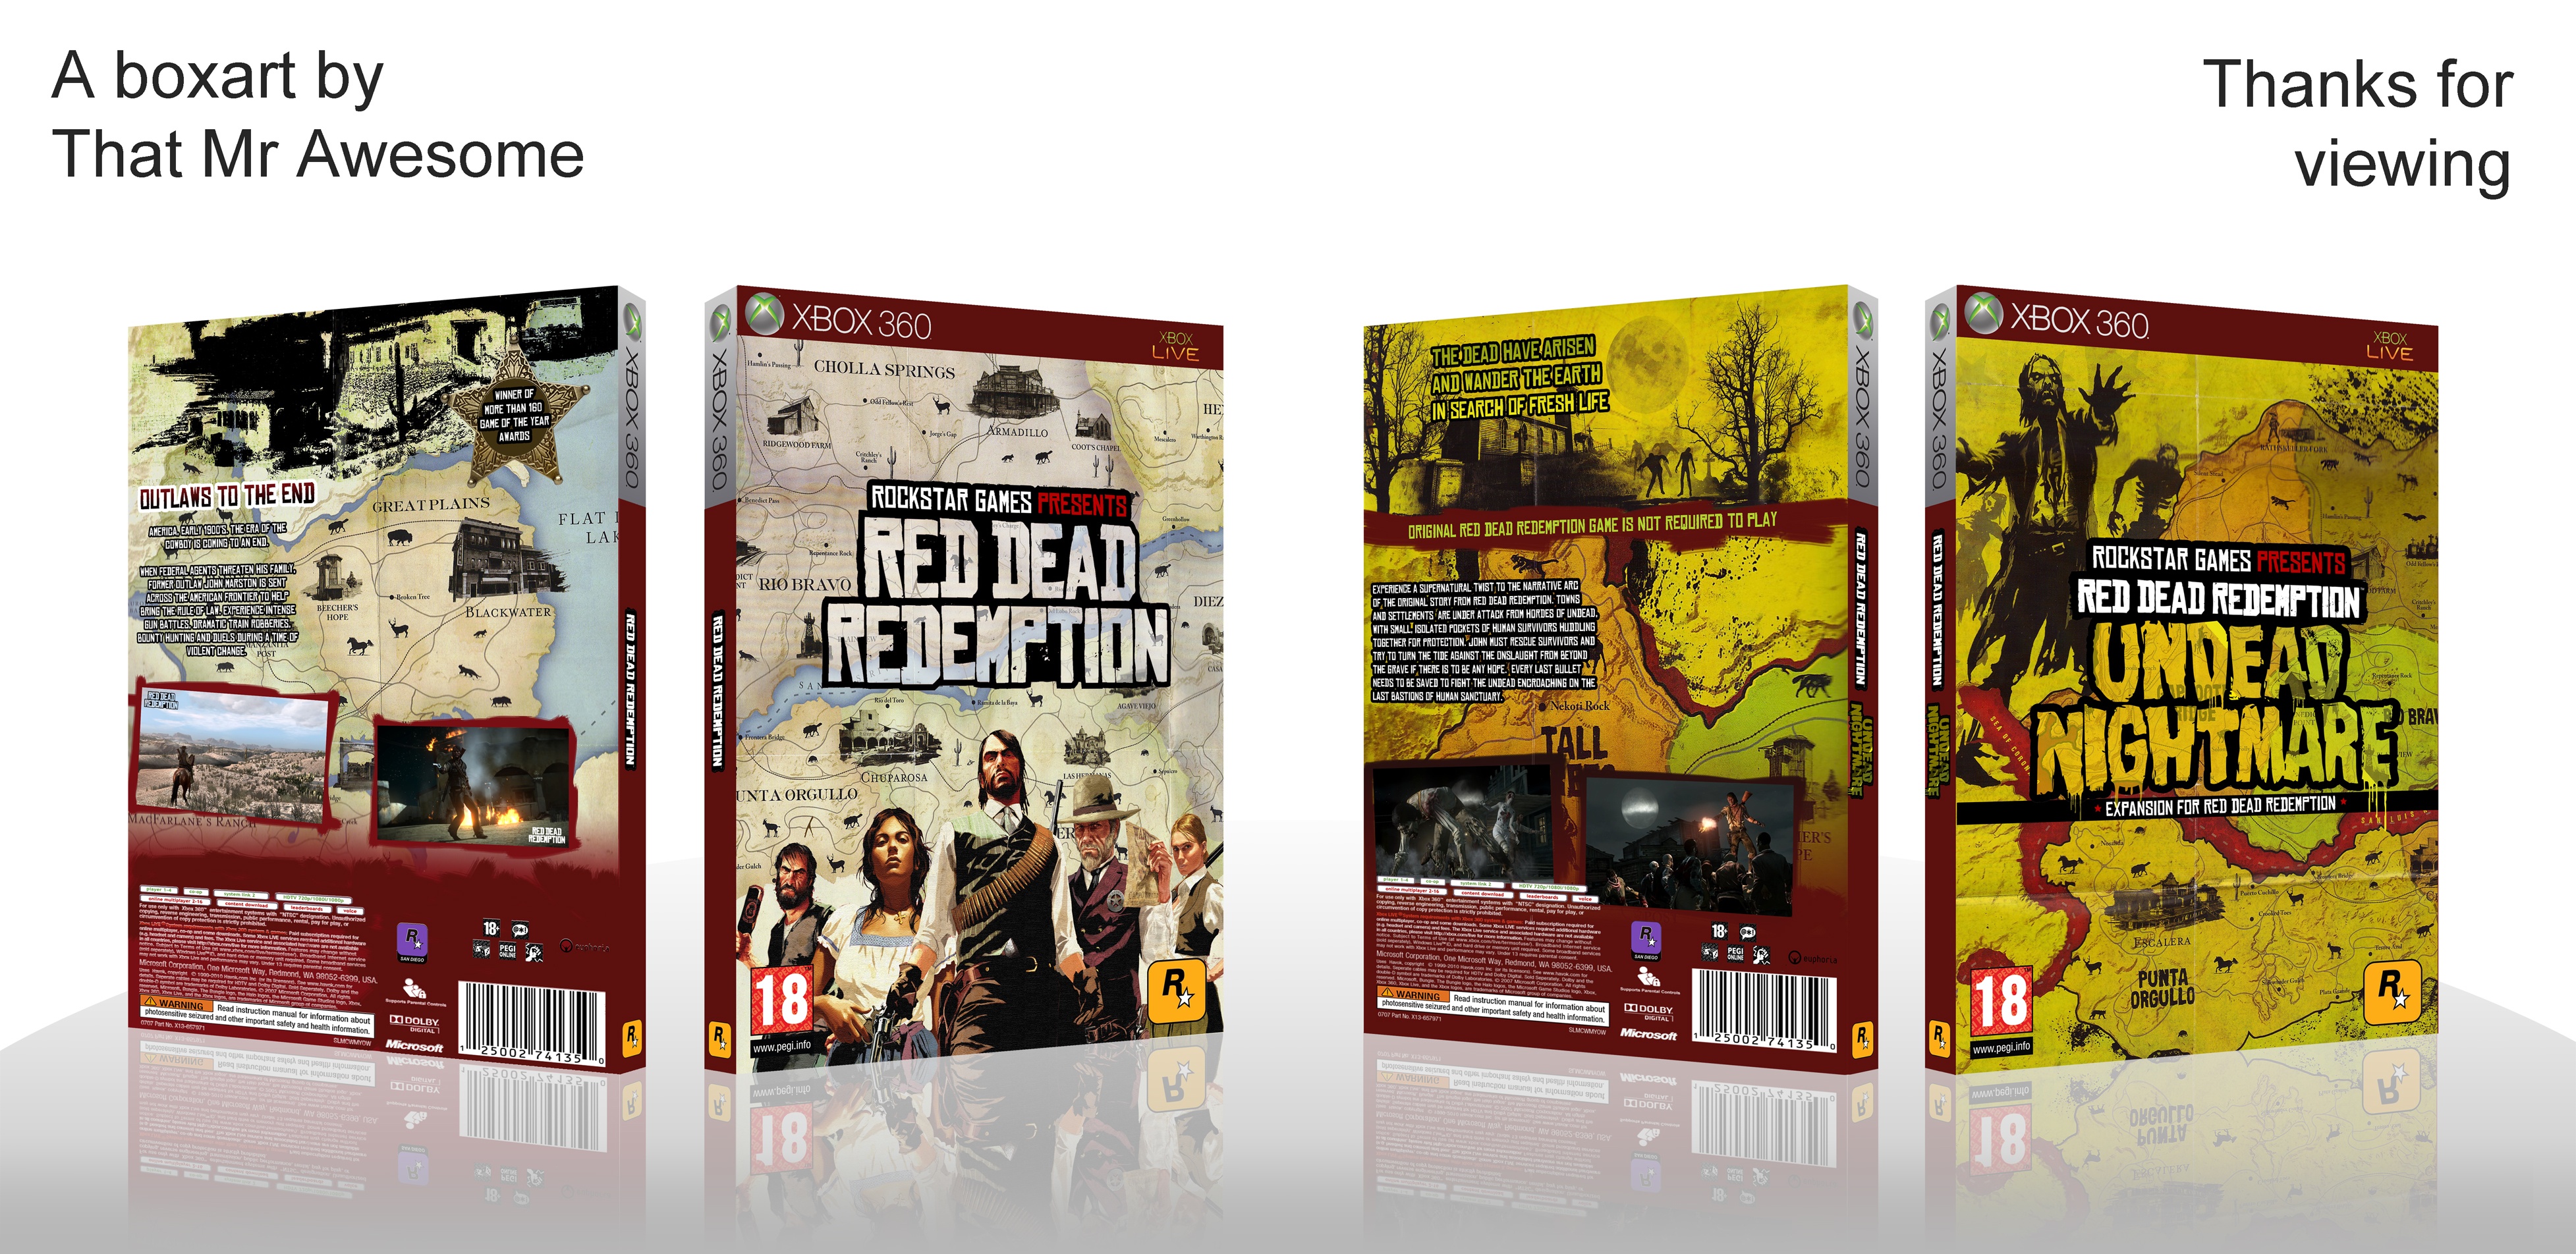 Red Dead Redemption & Undead Nightmare box cover